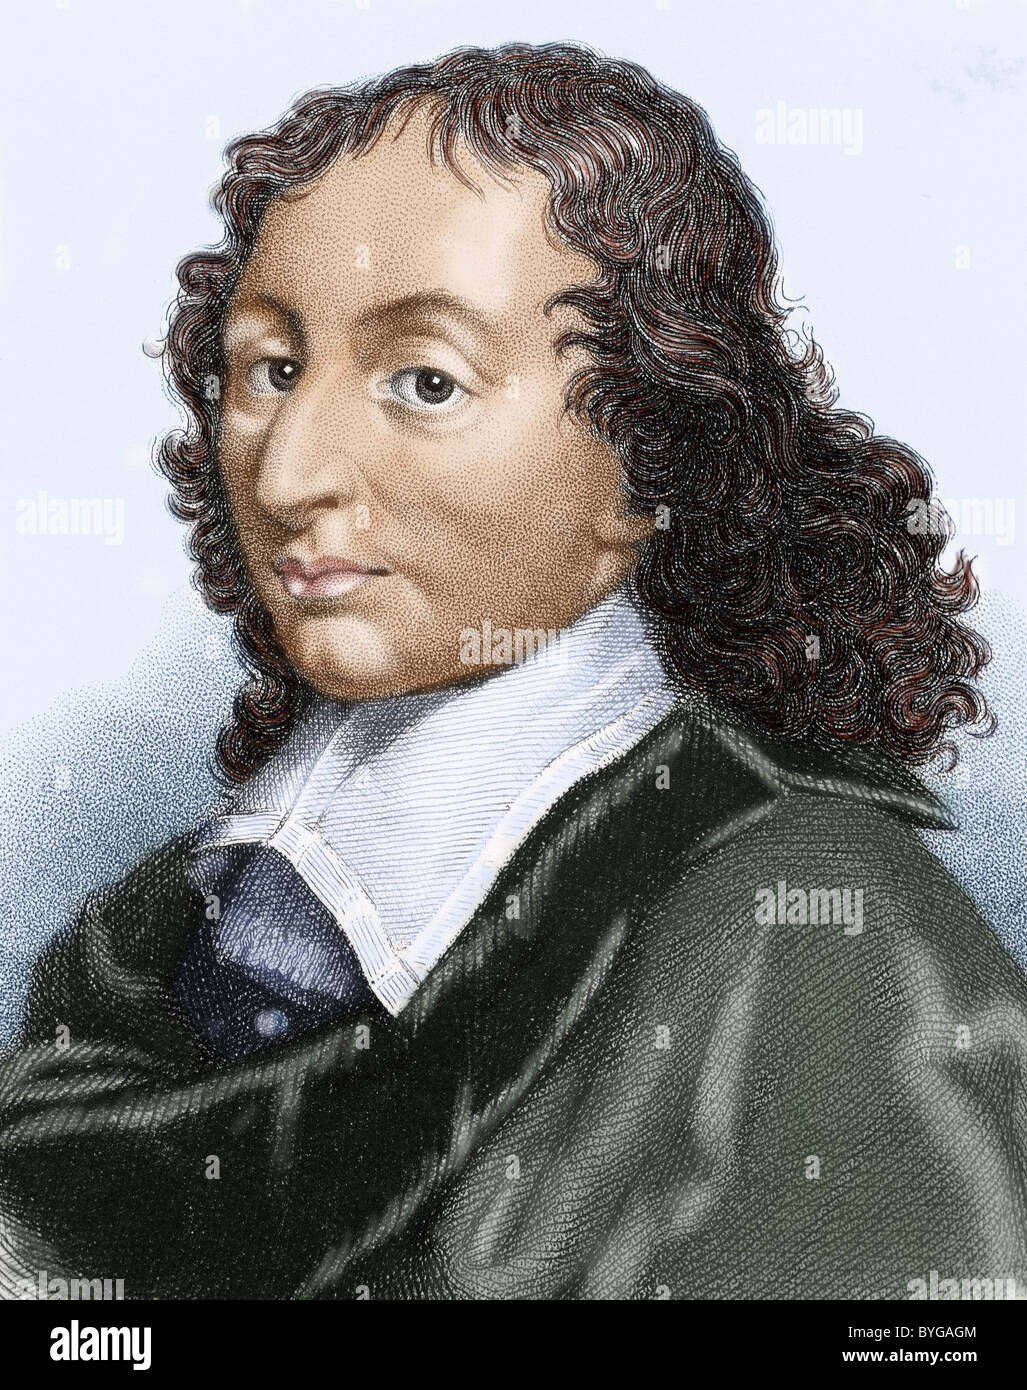 Pascal, Blaise (1623-1662). French mathematician, physicist and philosopher. Colored engraving. Stock Photo